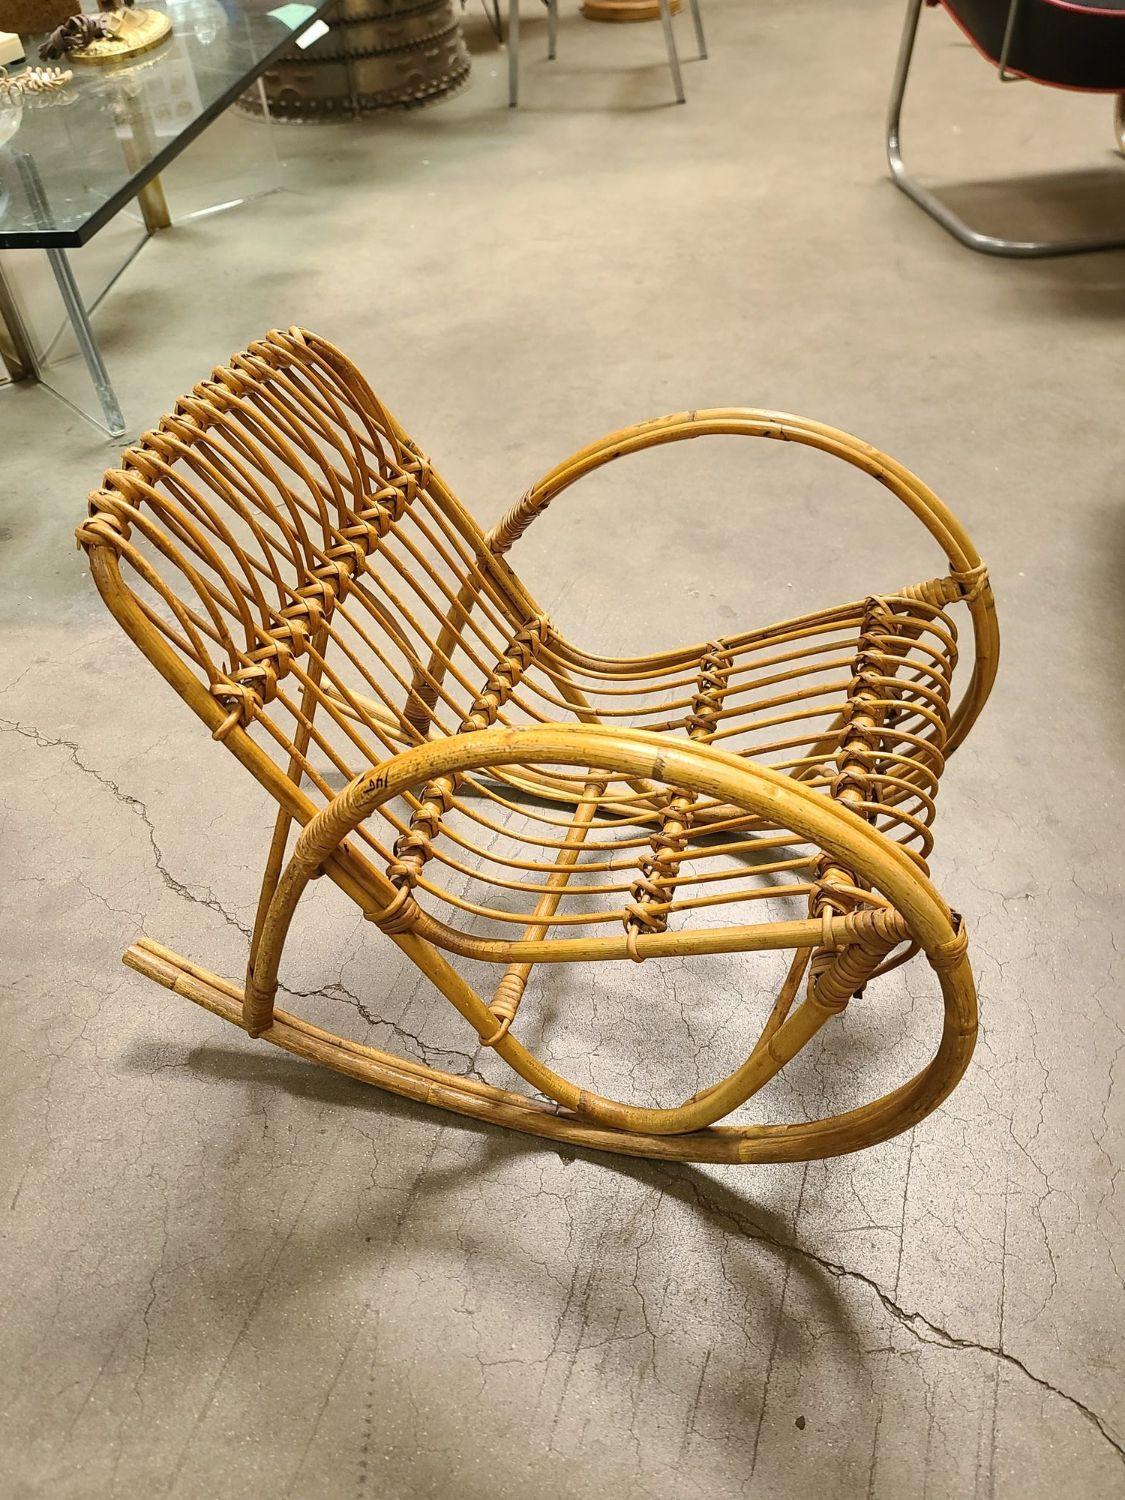 Rare Child size oversized Franco Albini-style two-strand round arm stick rattan rocking chair.
We only purchase and sell only the best and finest rattan furniture made by the best and most well-known American designers and manufacturers